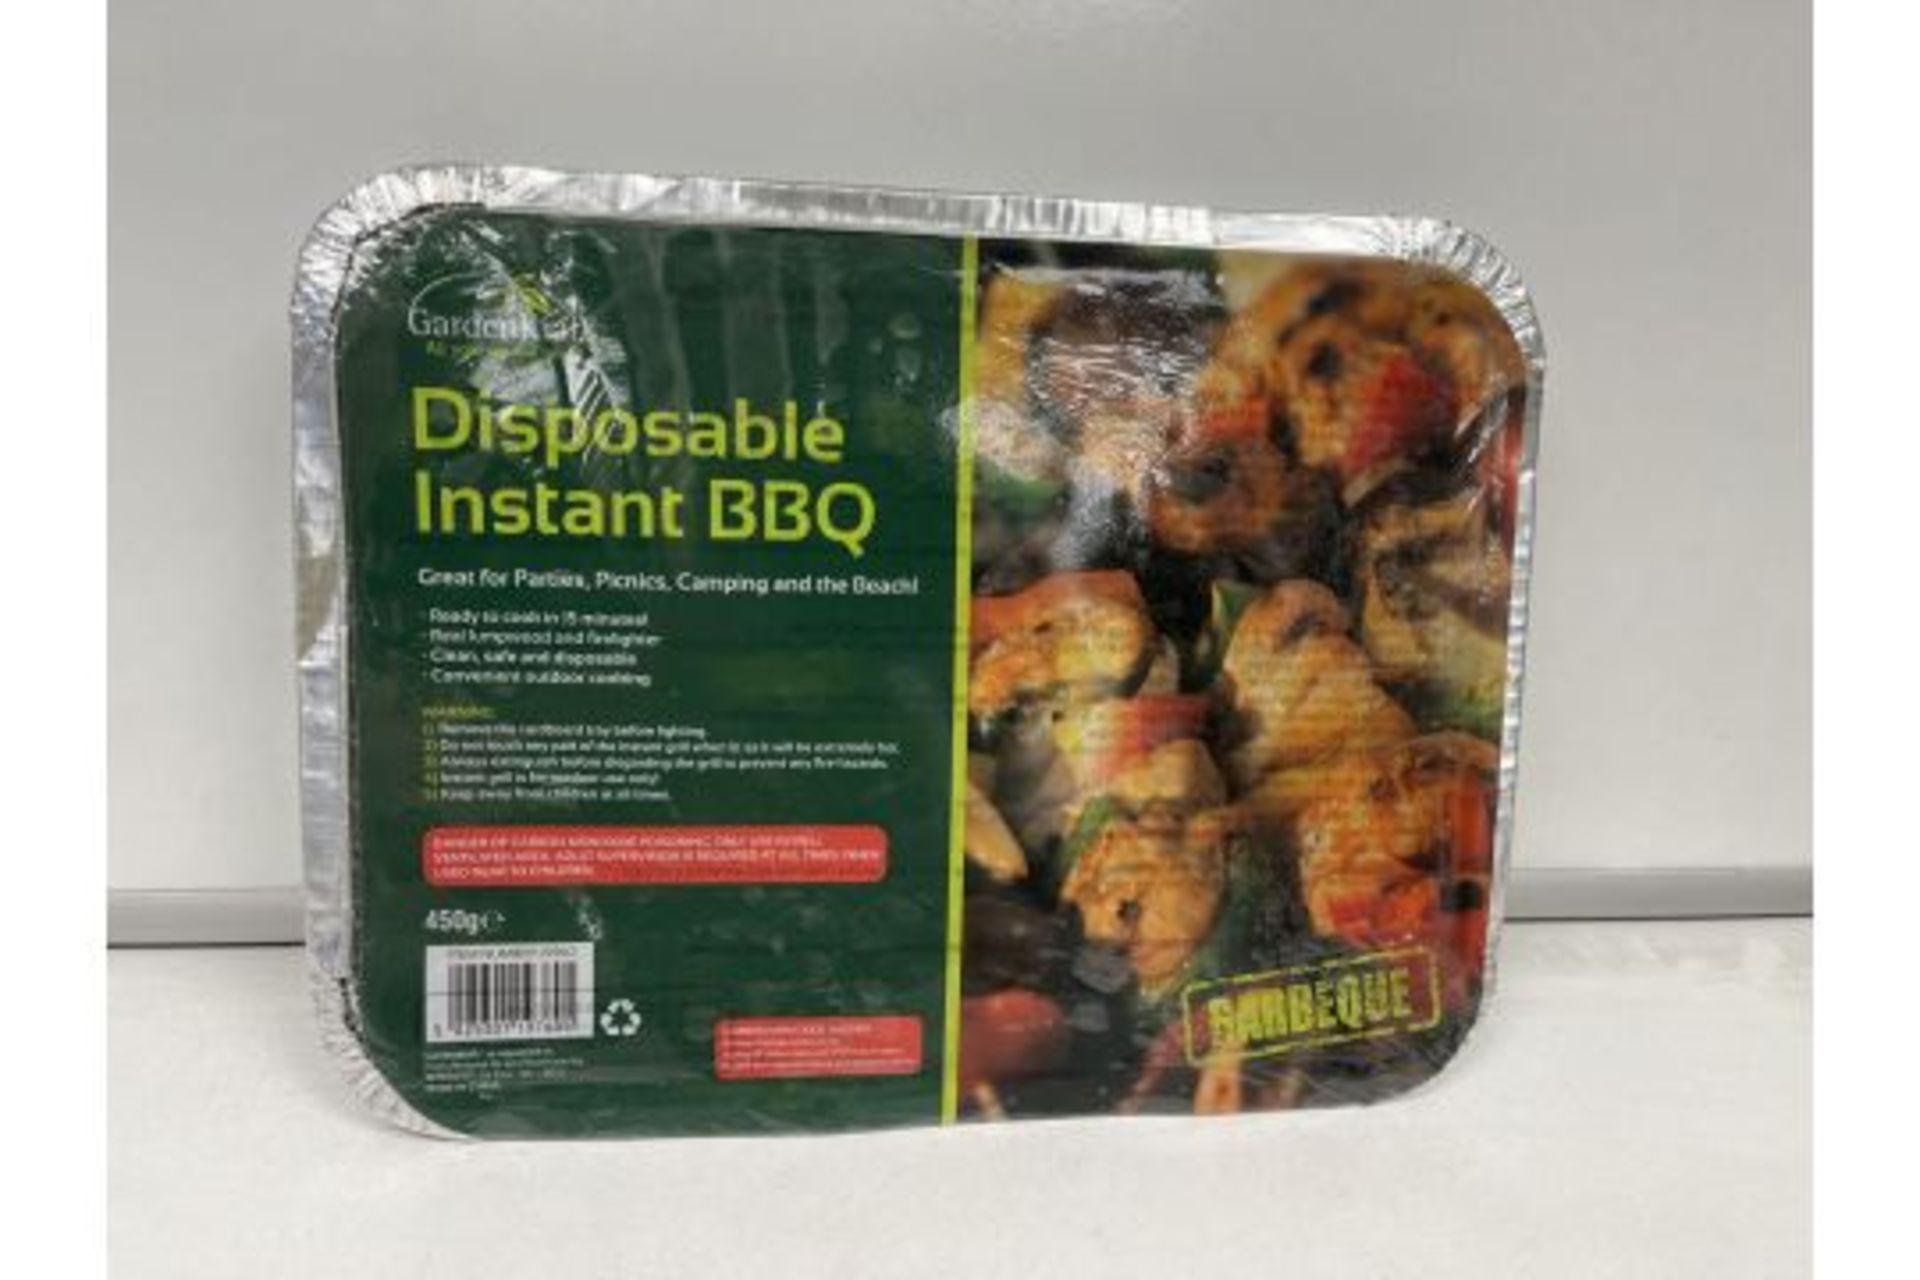 15 X BRAND NEW GARDENKRAFT DISPOSABLE INSTANT BBQ R4 - Image 2 of 2